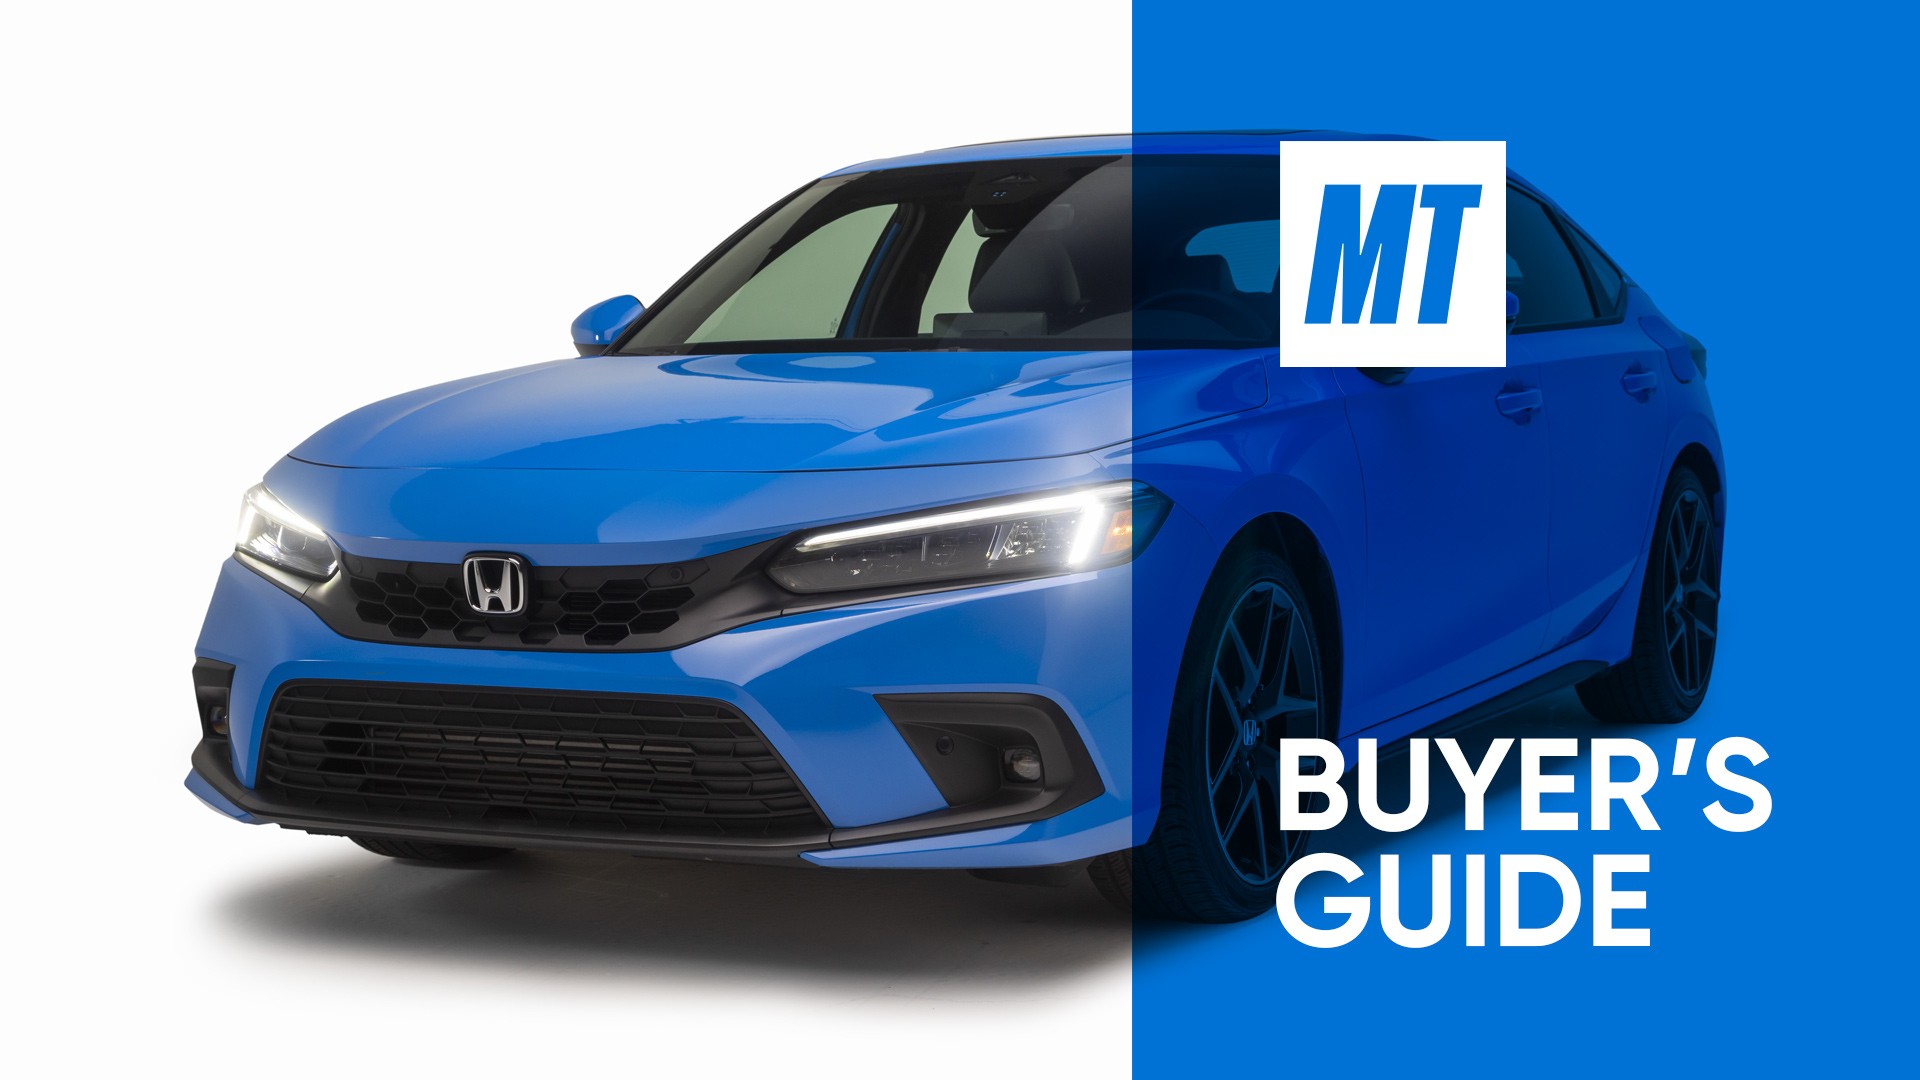 Honda Prices, Reviews, and Photos - MotorTrend